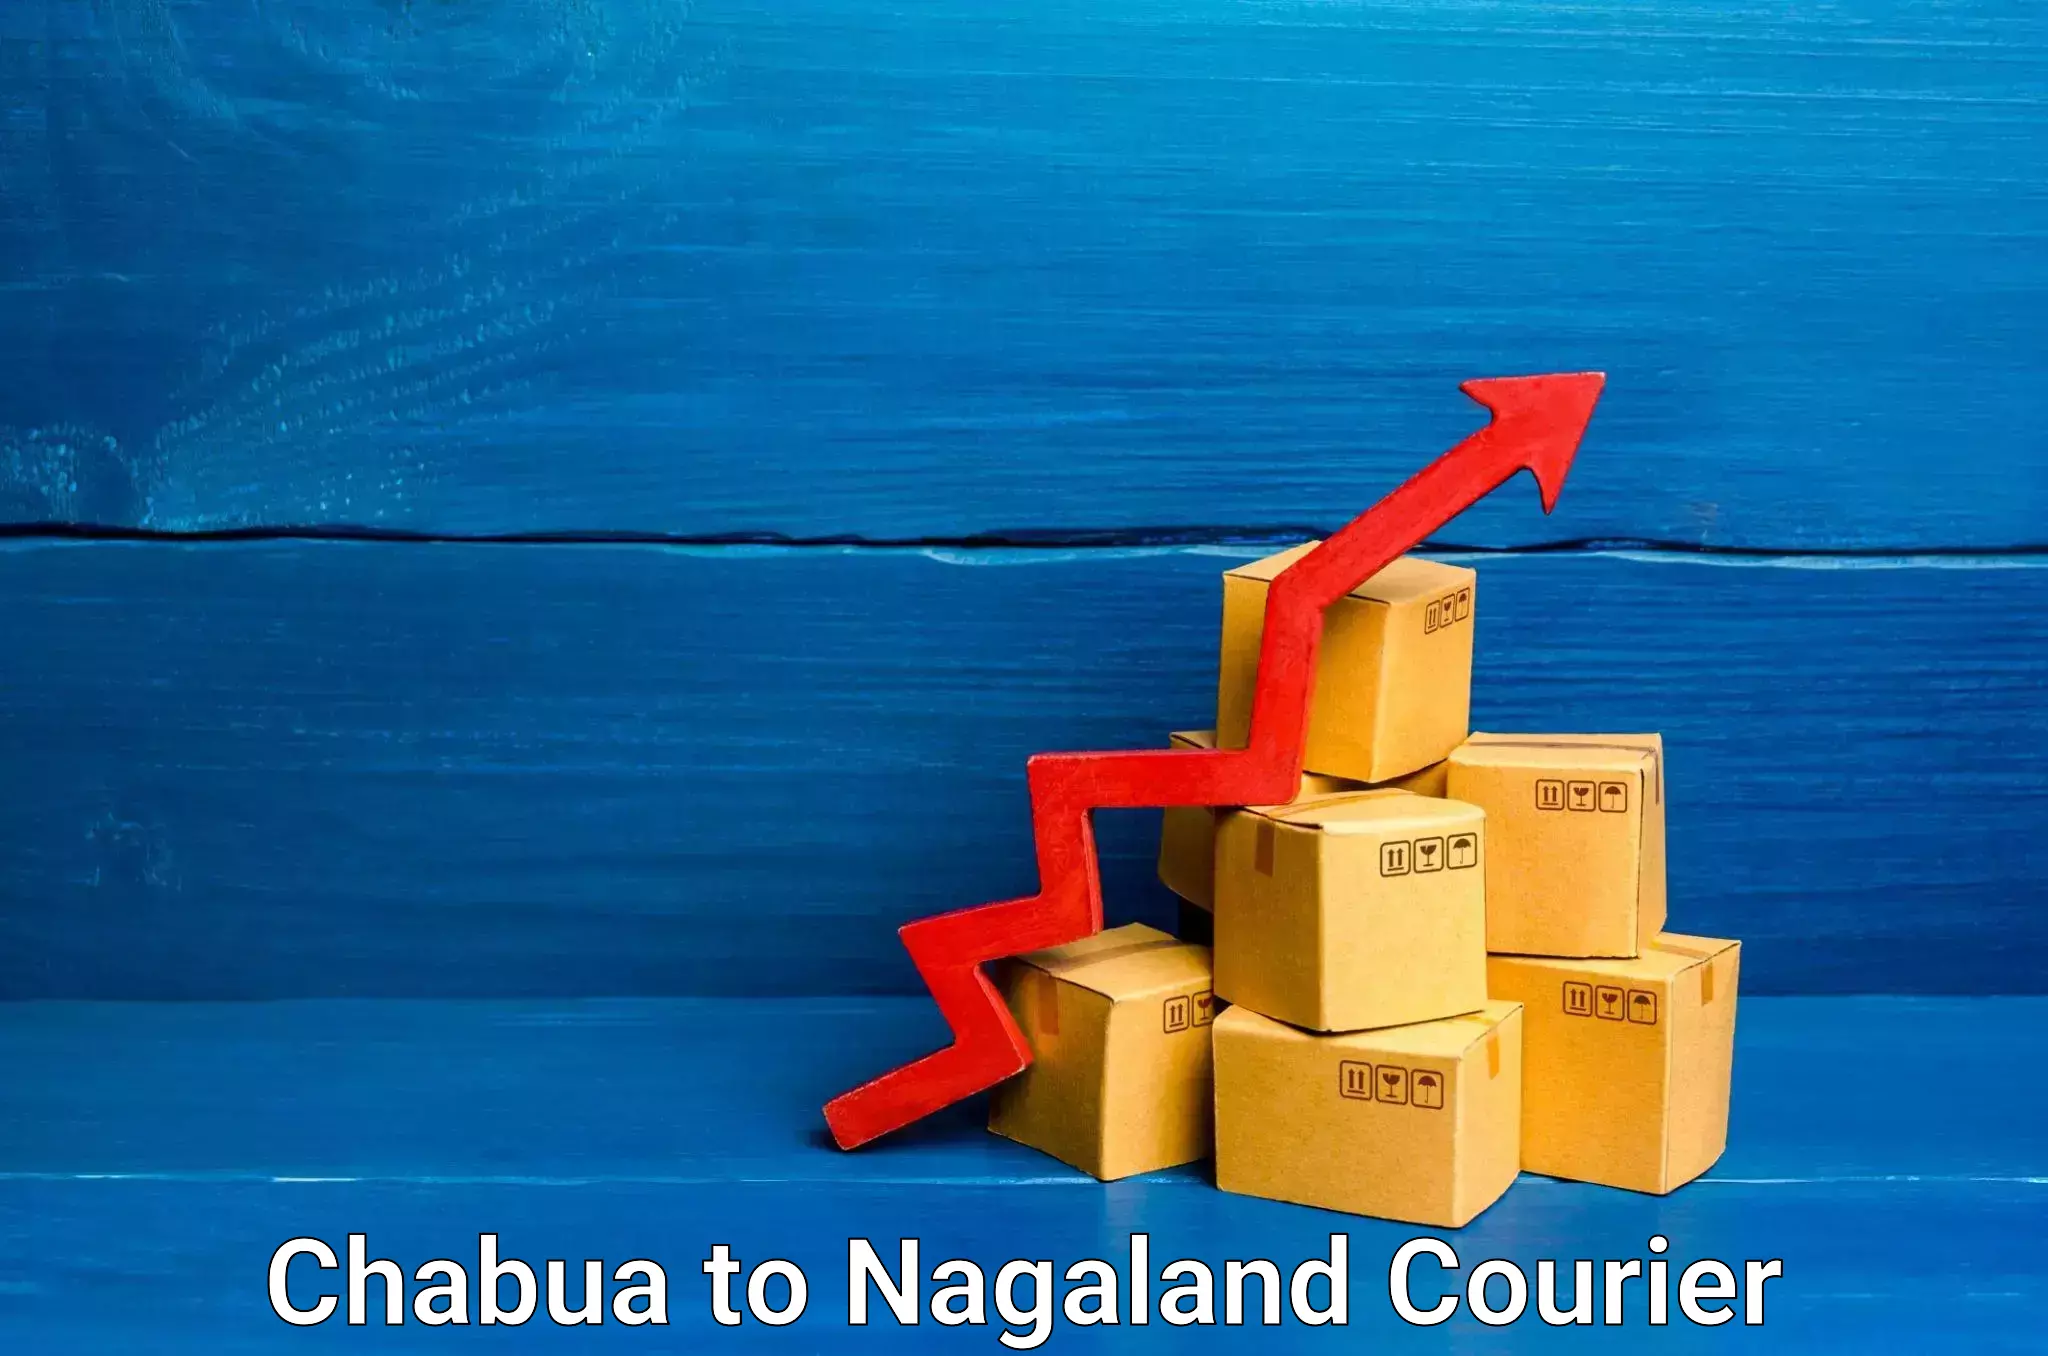 Express delivery capabilities in Chabua to Nagaland